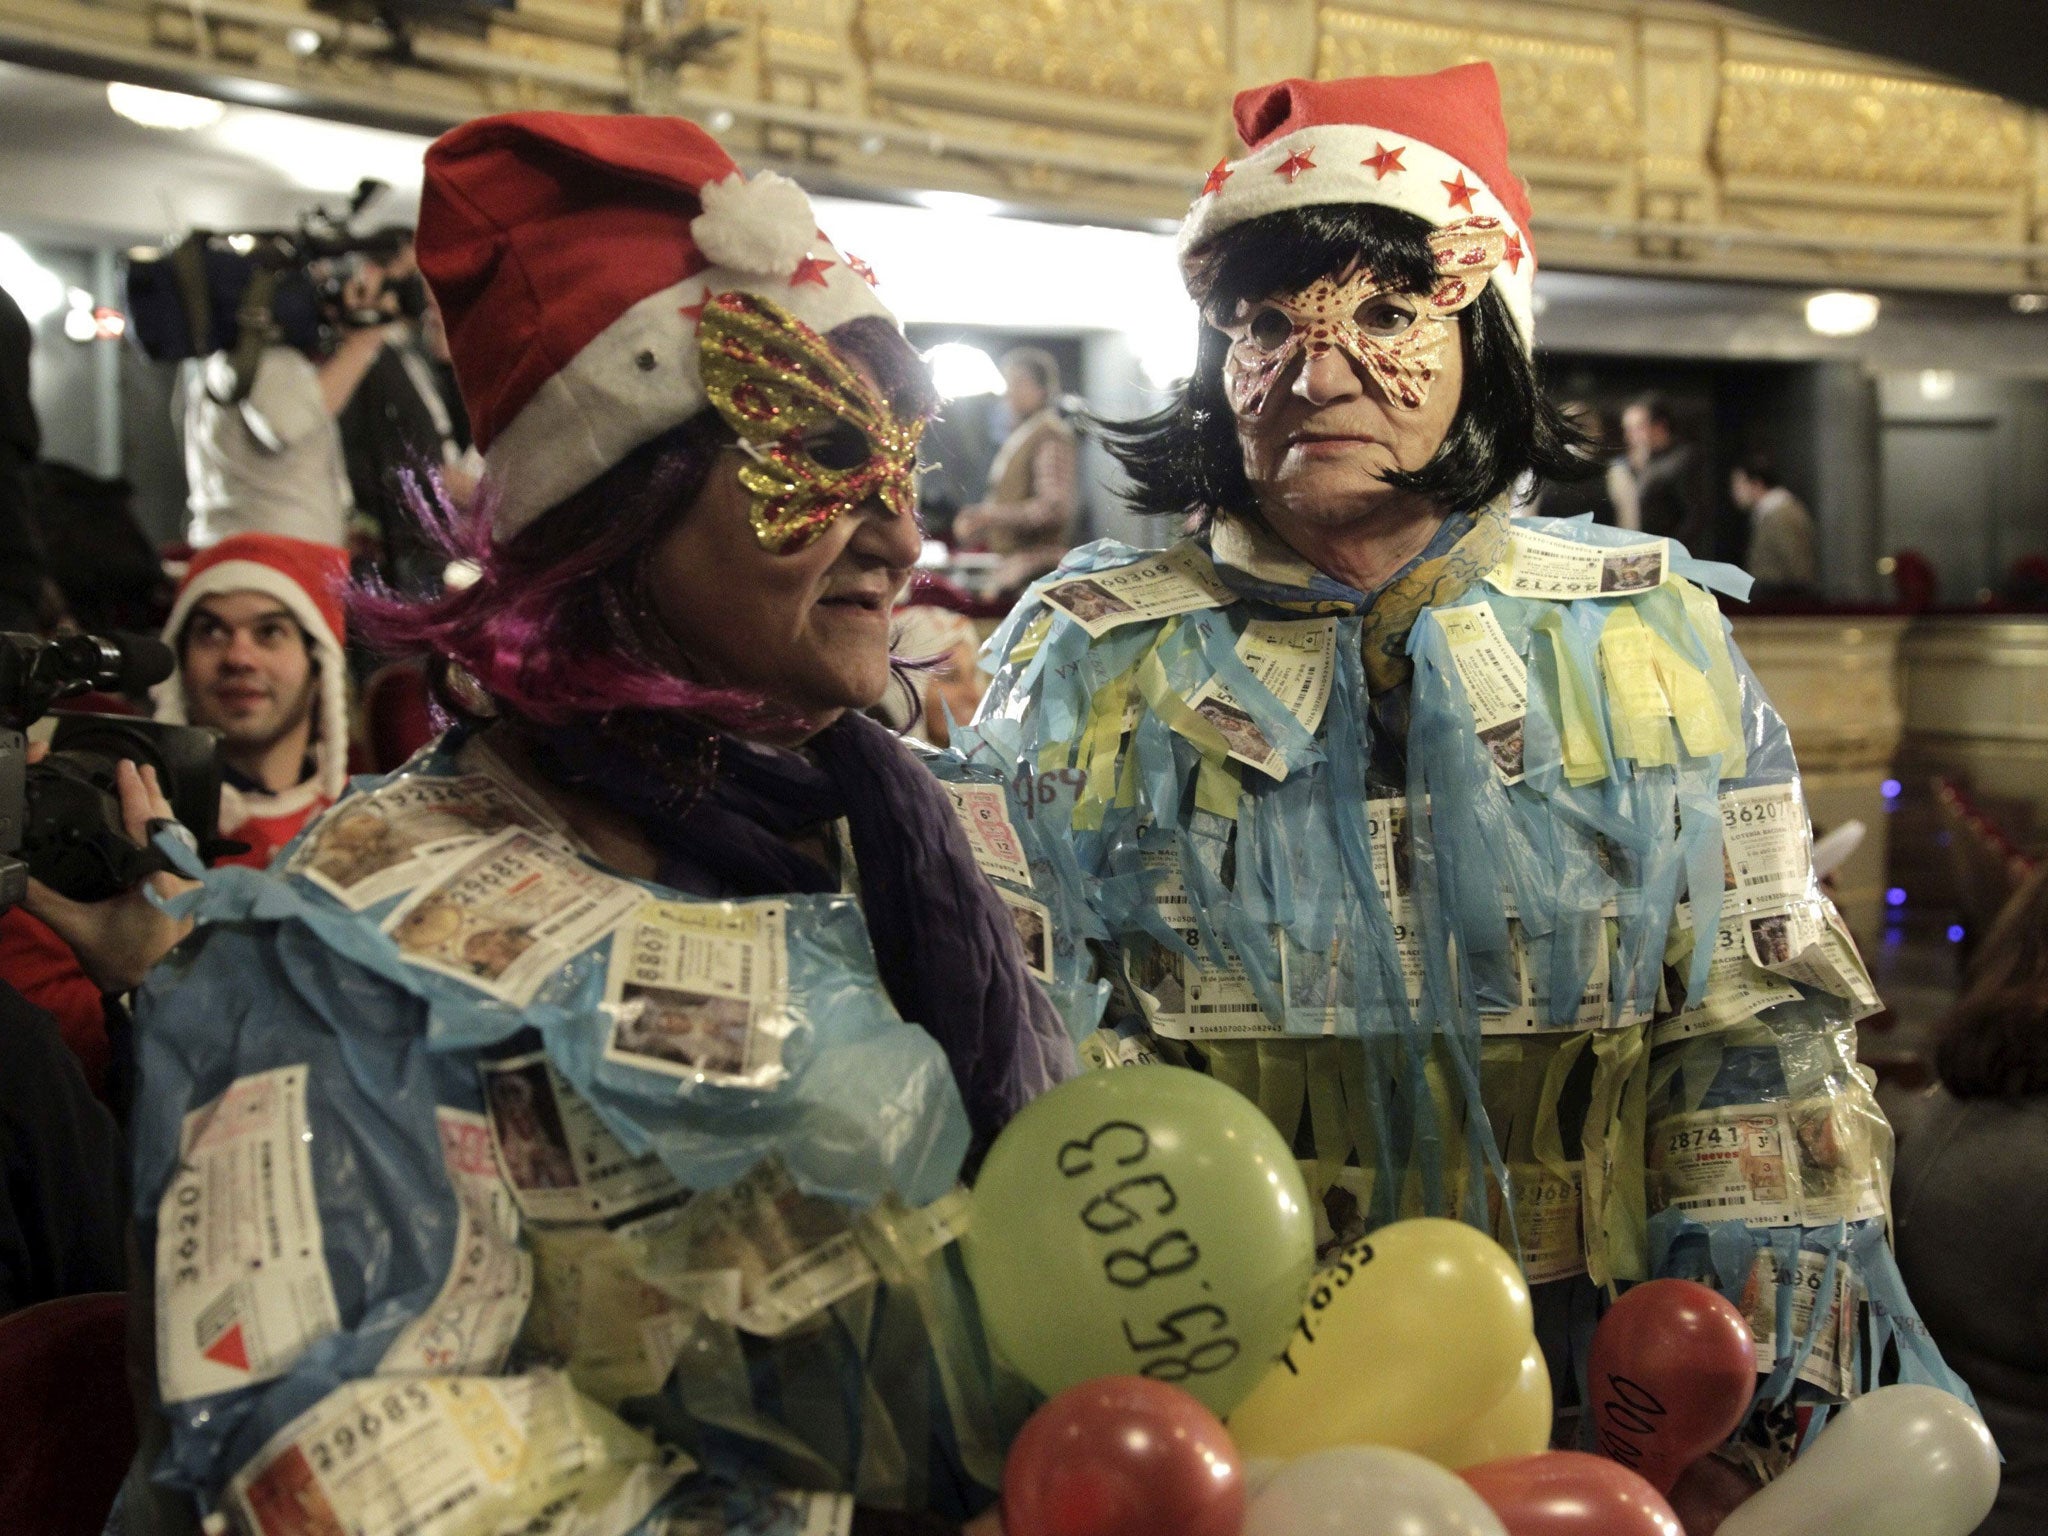 Two women display 'El Gordo' lottery tickets on their bodies as they wait for the beginning of the draw at Madrid's Teatro Real